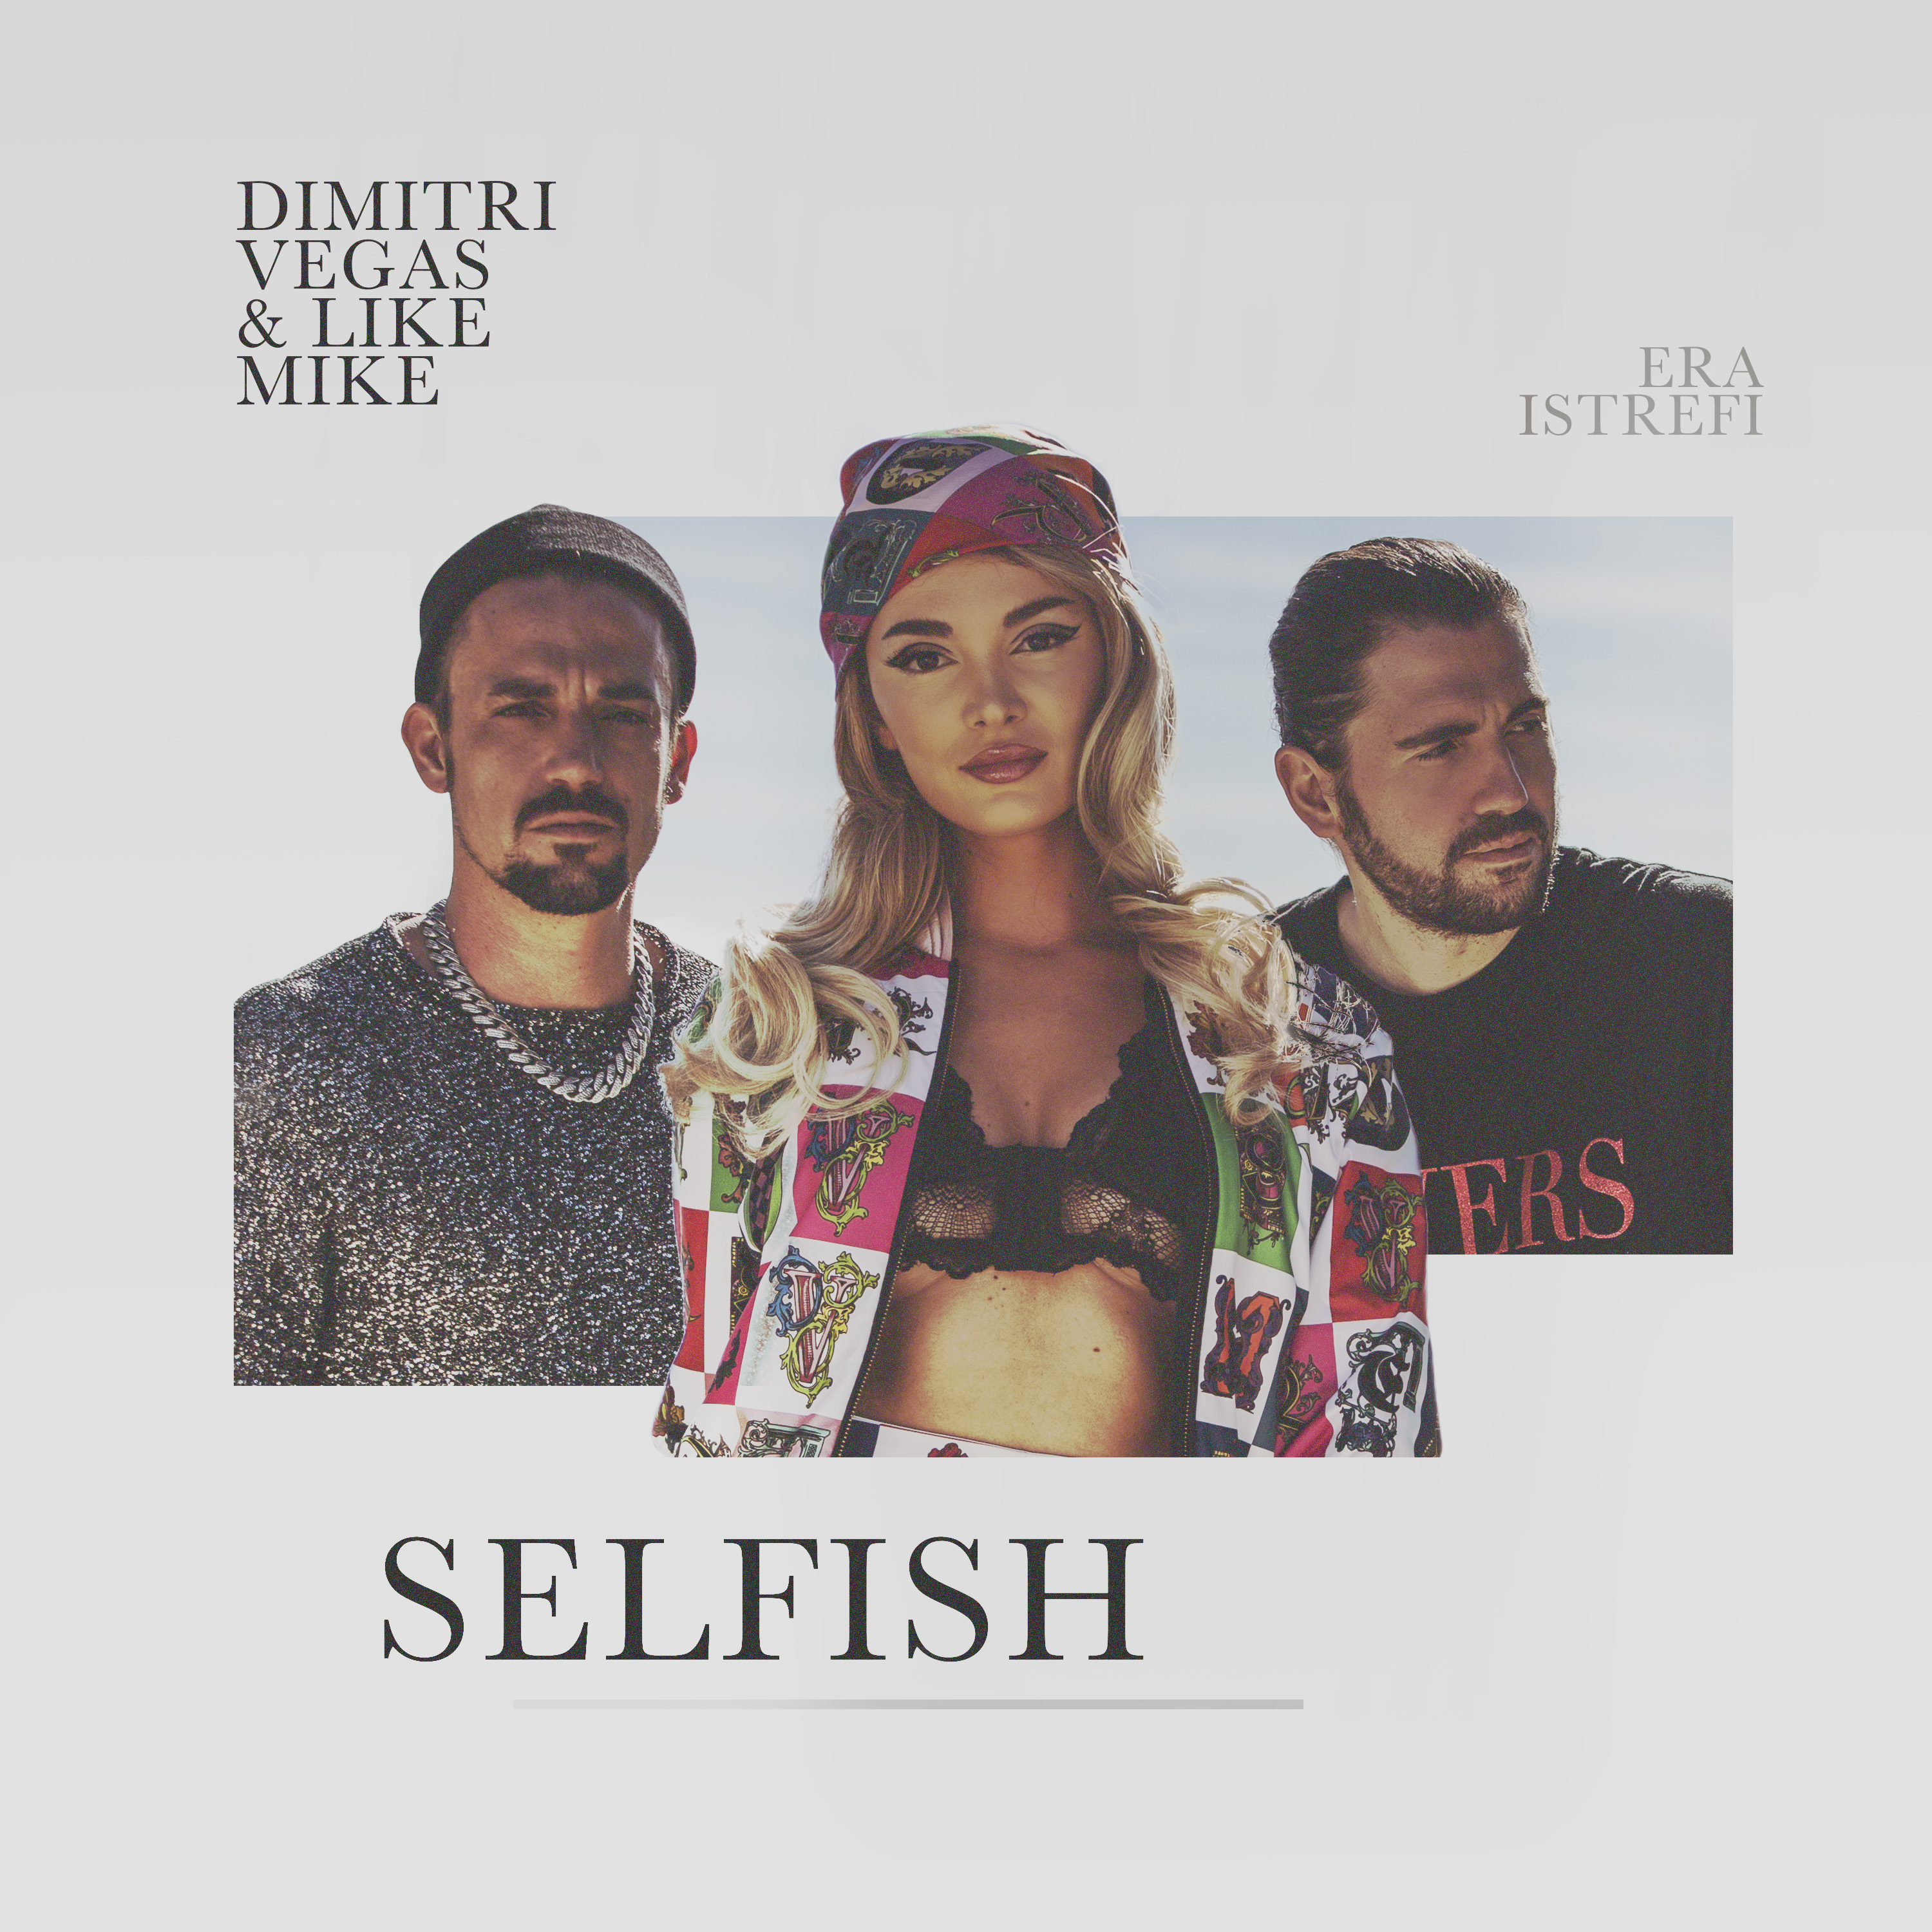 Dimitri Vegas & Like Mike join forces with on-fire vocalist Era Istrefi for ‘Selfish’